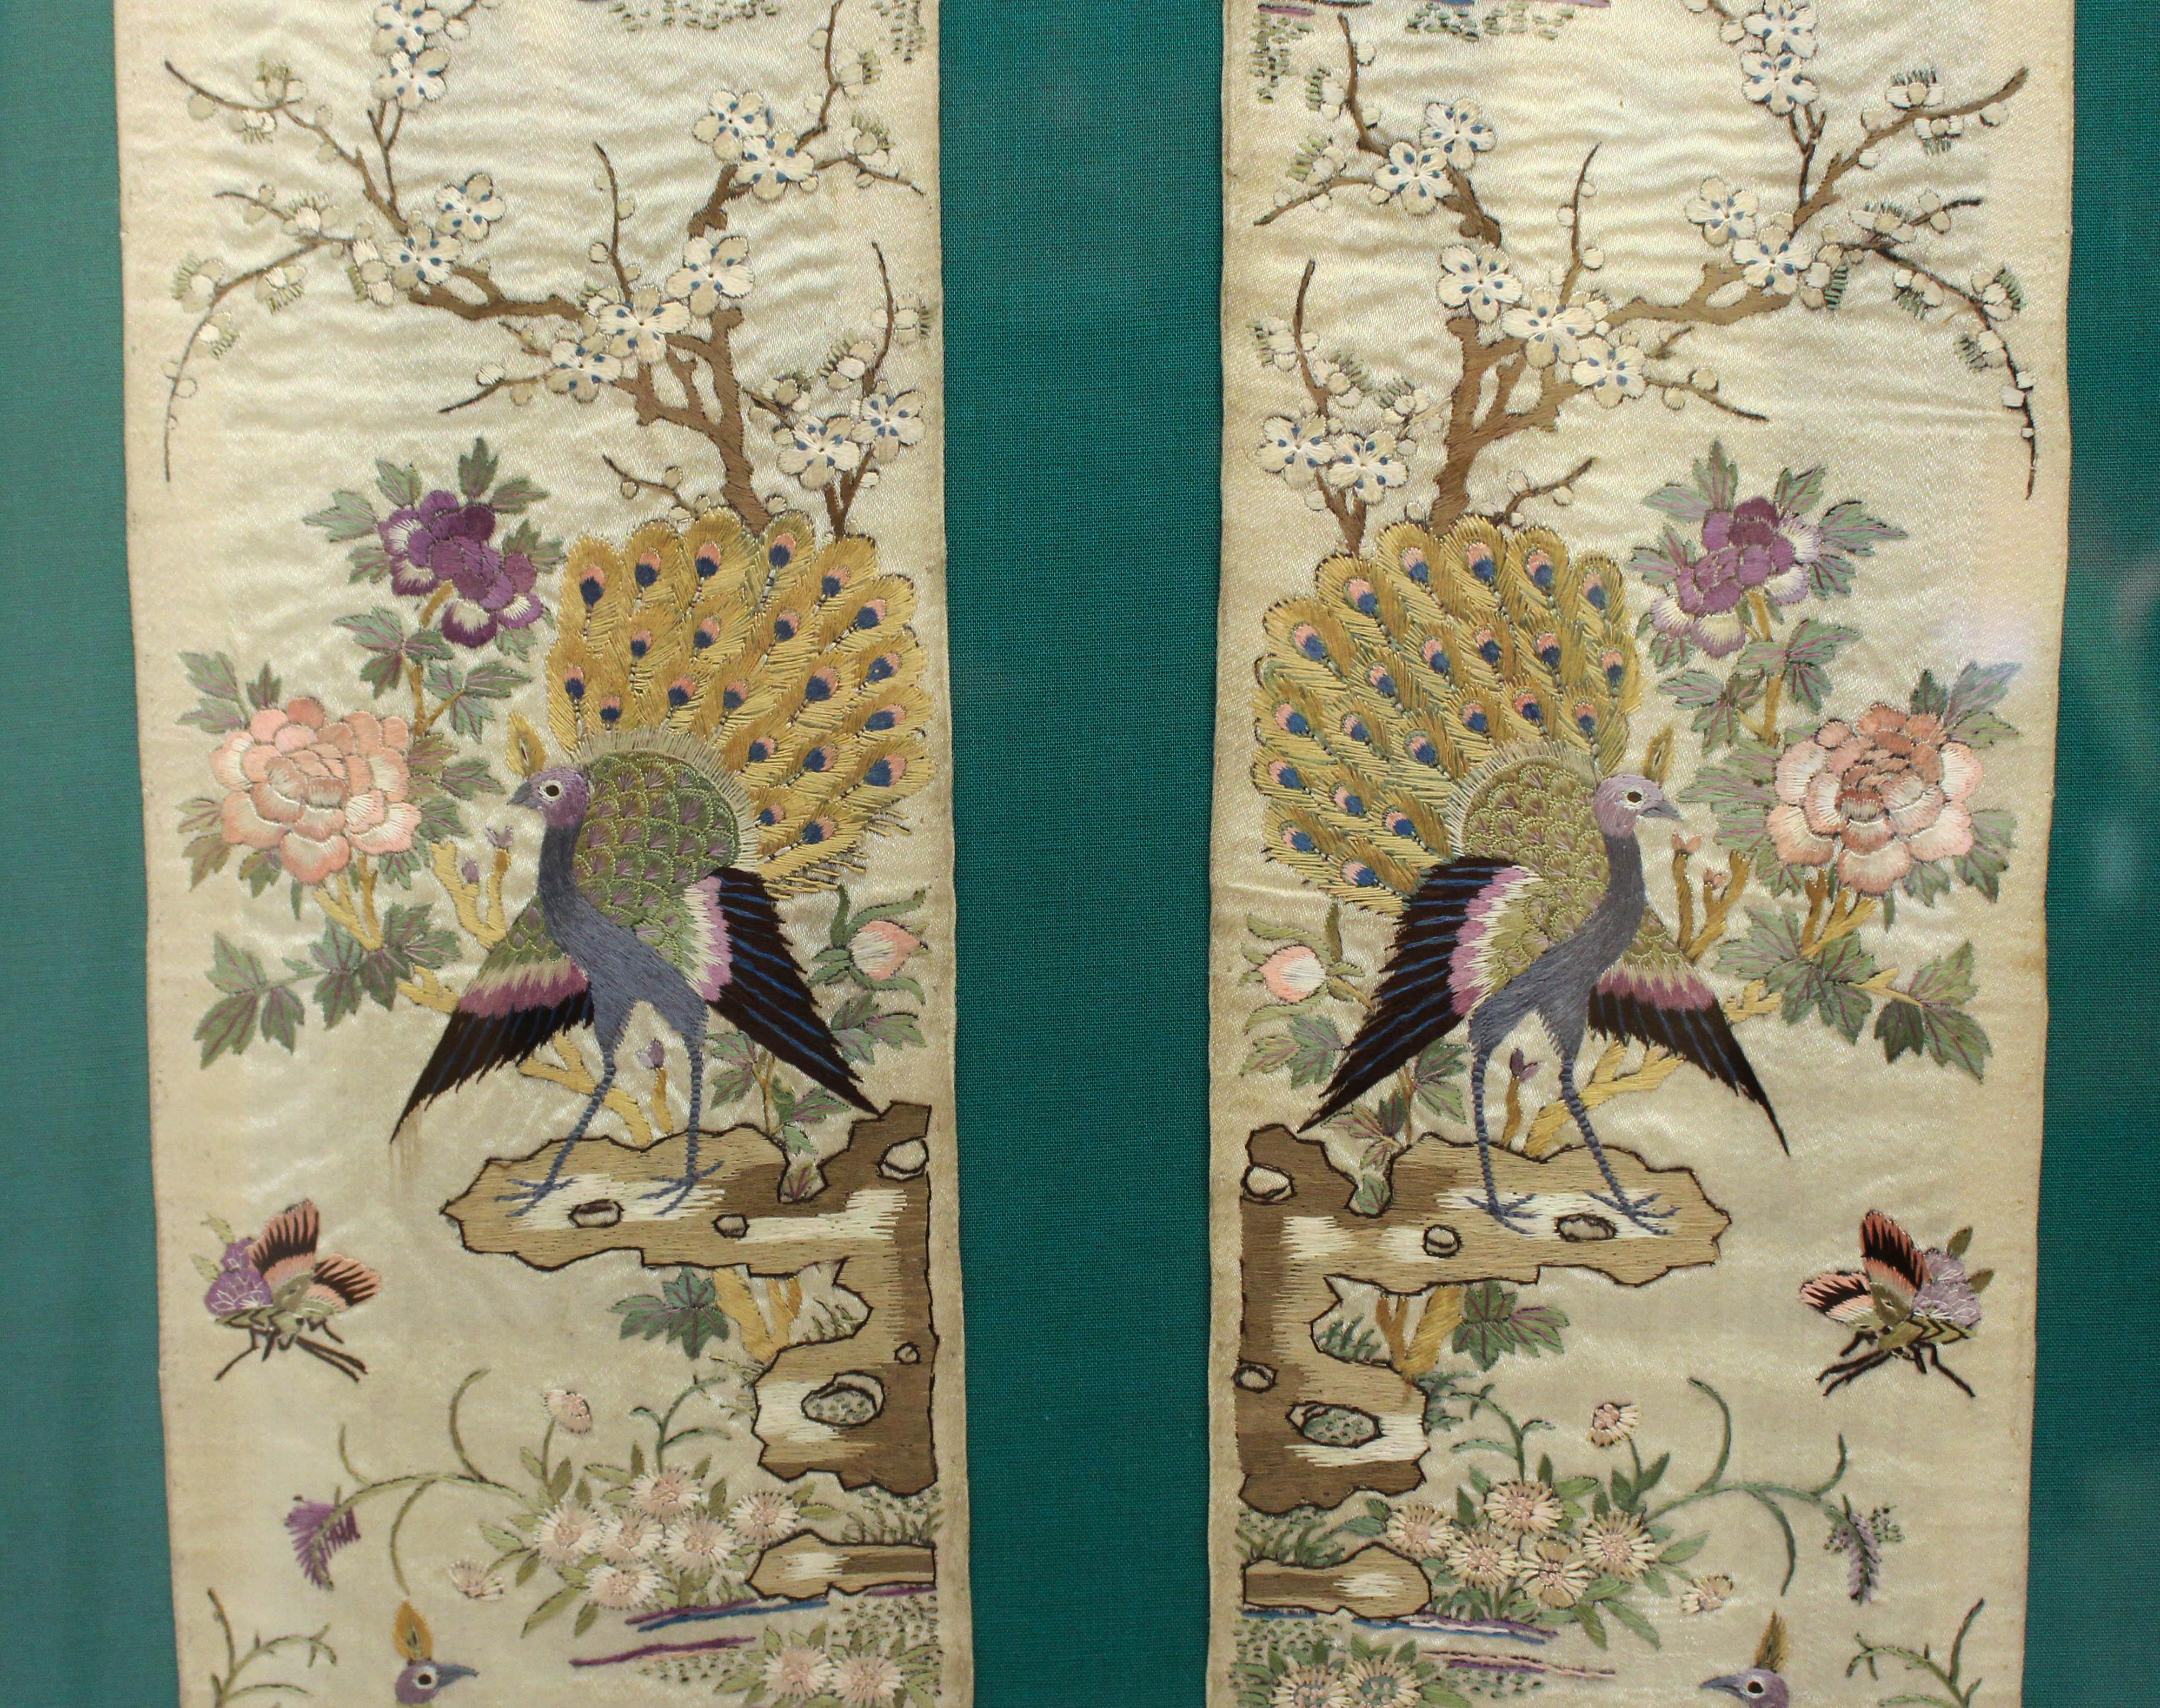 A framed pair of Japanese silk sleeve bands, late 19th-early 20th century. Embroidered in silk with pine trees, cranes, peacocks, peahens, birds & butterflies. Provenance: Dr. Hugh McCormick Smith (1865-1941), world famous naturalist, medical doctor